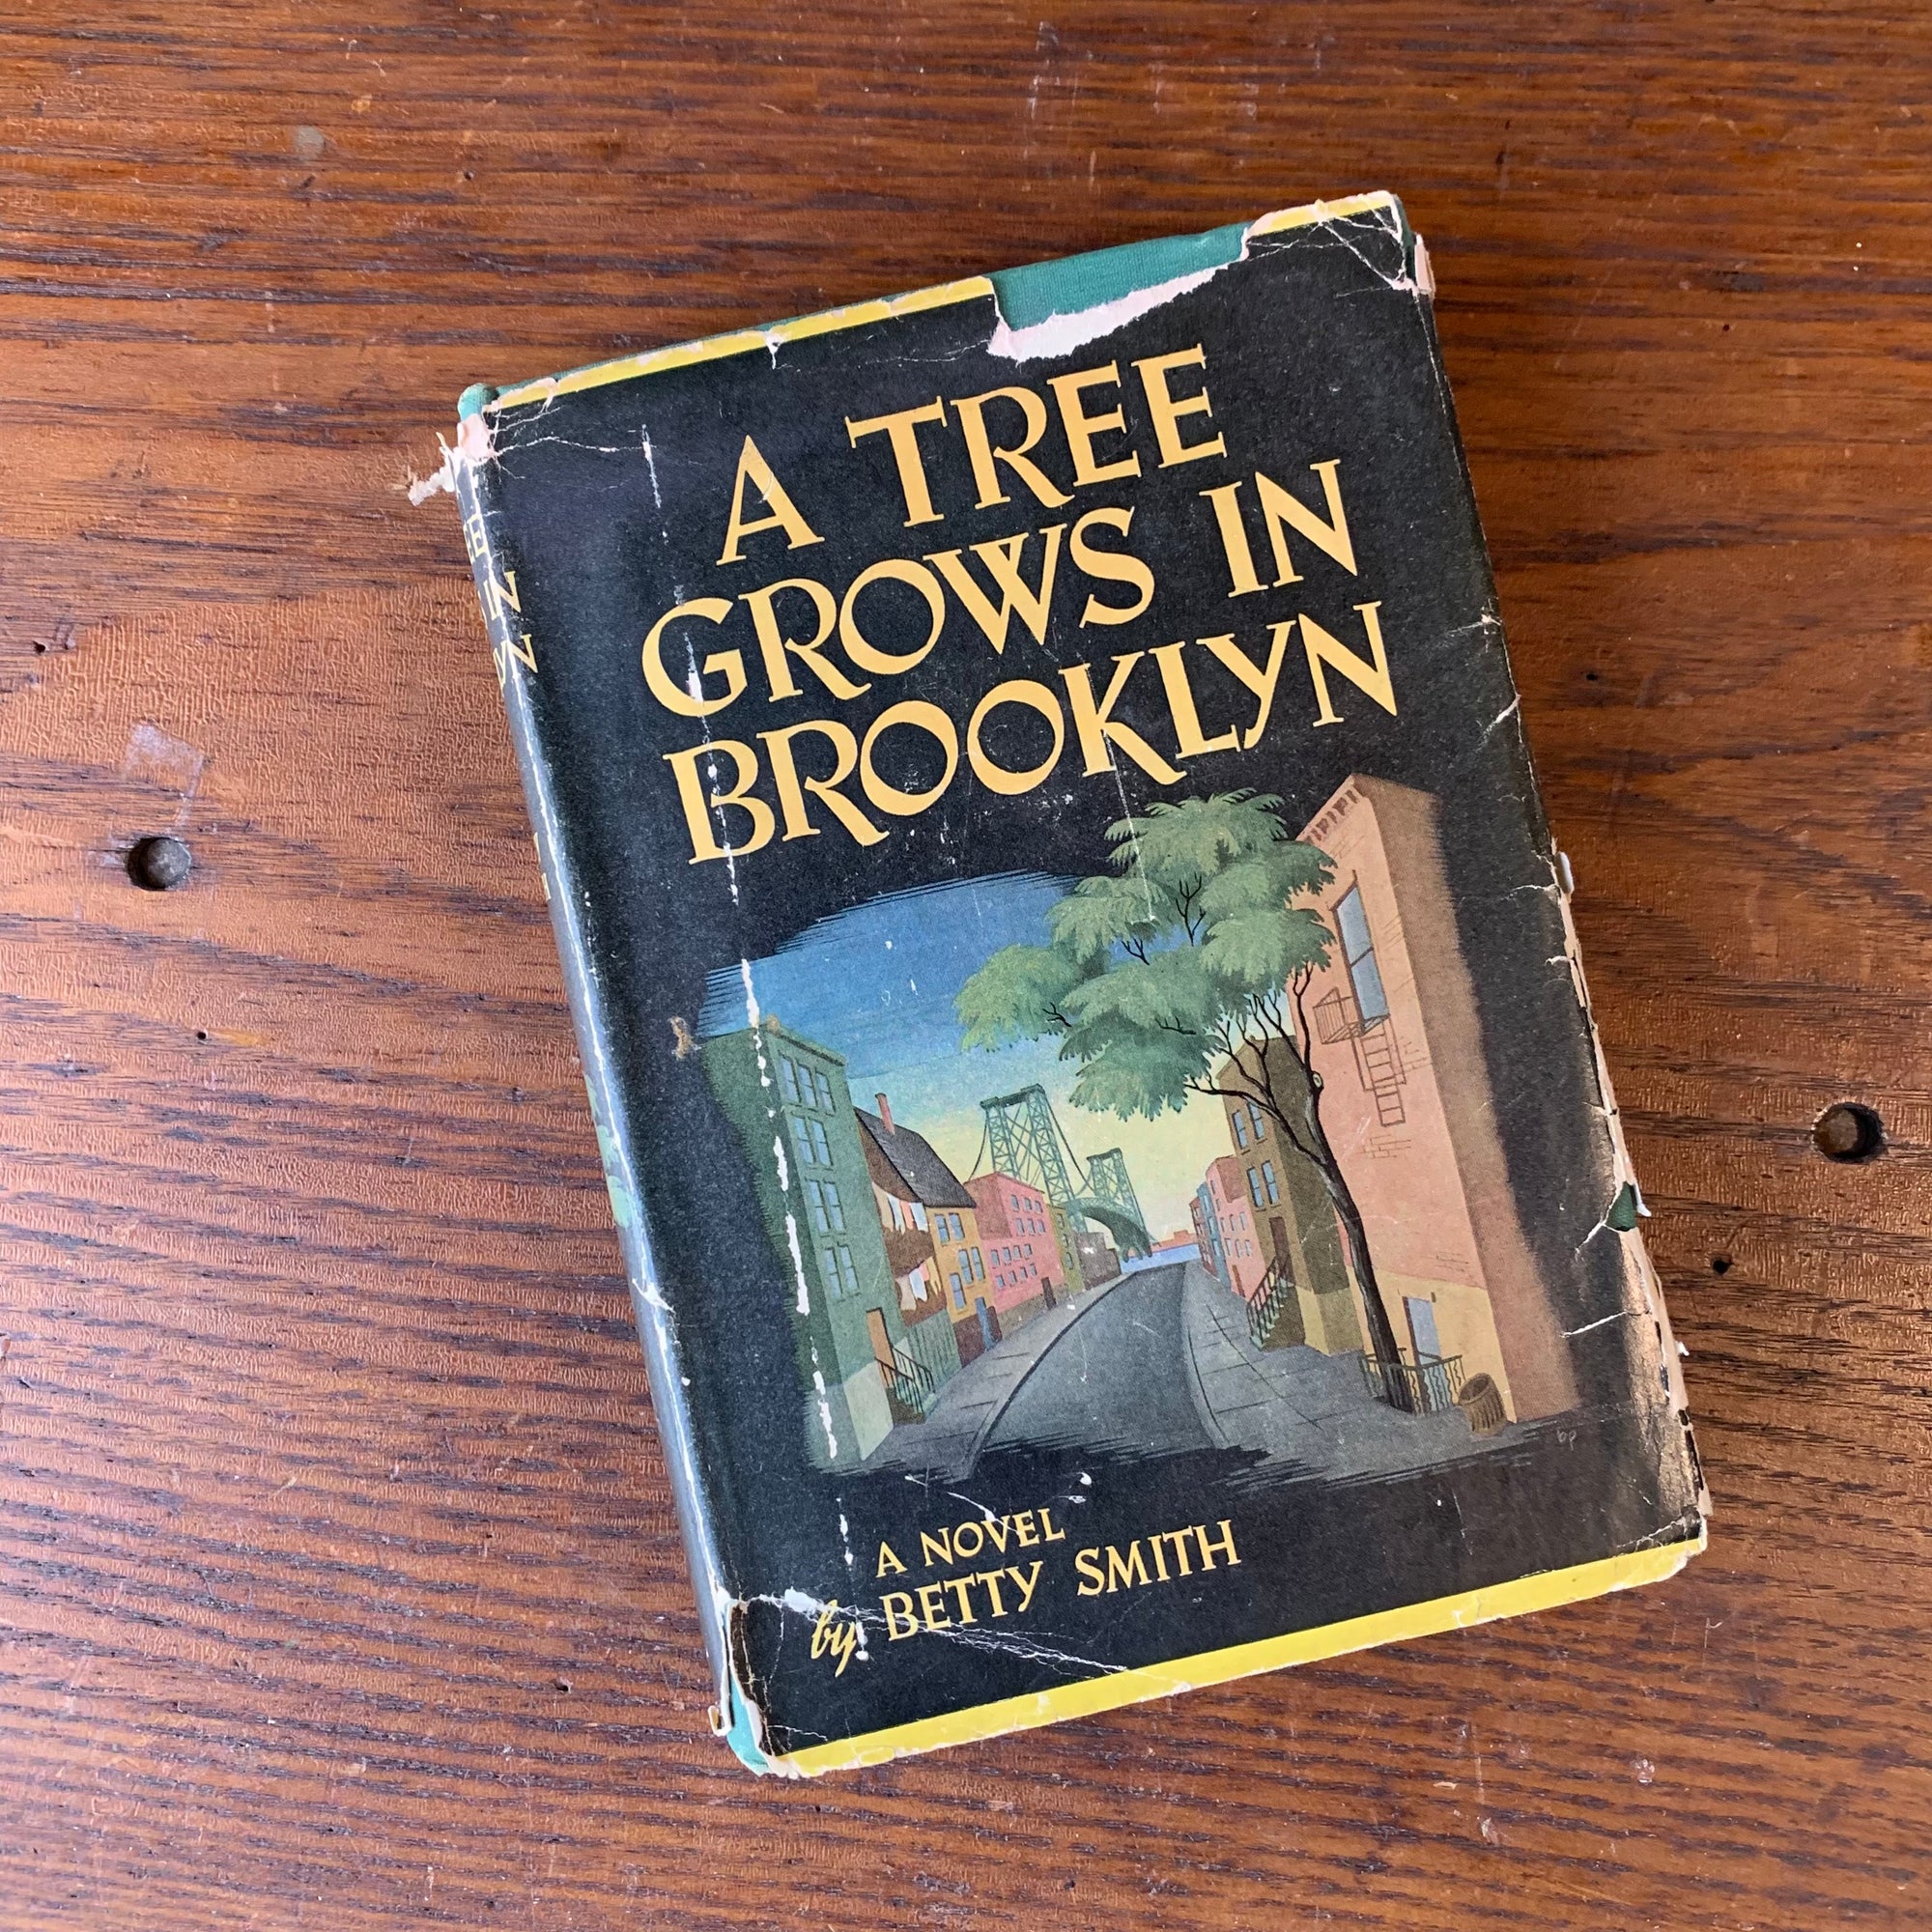 Log Cabin Vintage - vintage fiction, American Author, American novel - A Tree Grows in Brooklyn by Betty Smith - view of the book on a wood table showing the dust jacket's front cover